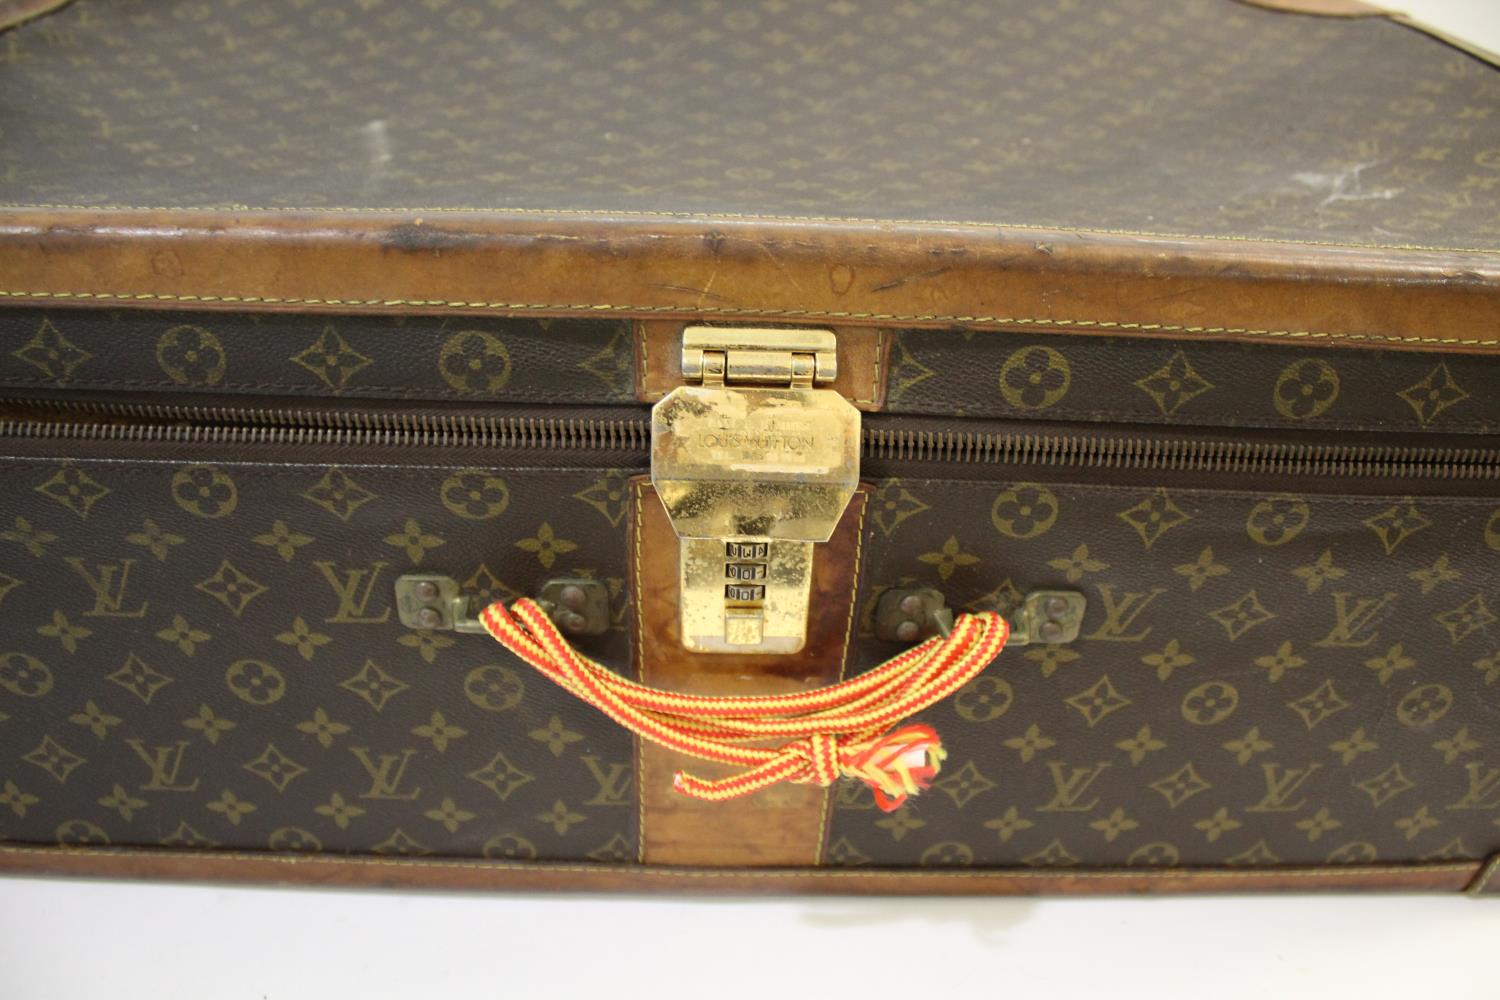 MODERN LOUIS VUITTON SUITCASE with a monogrammed exterior and leather trim, with a combination - Image 2 of 3